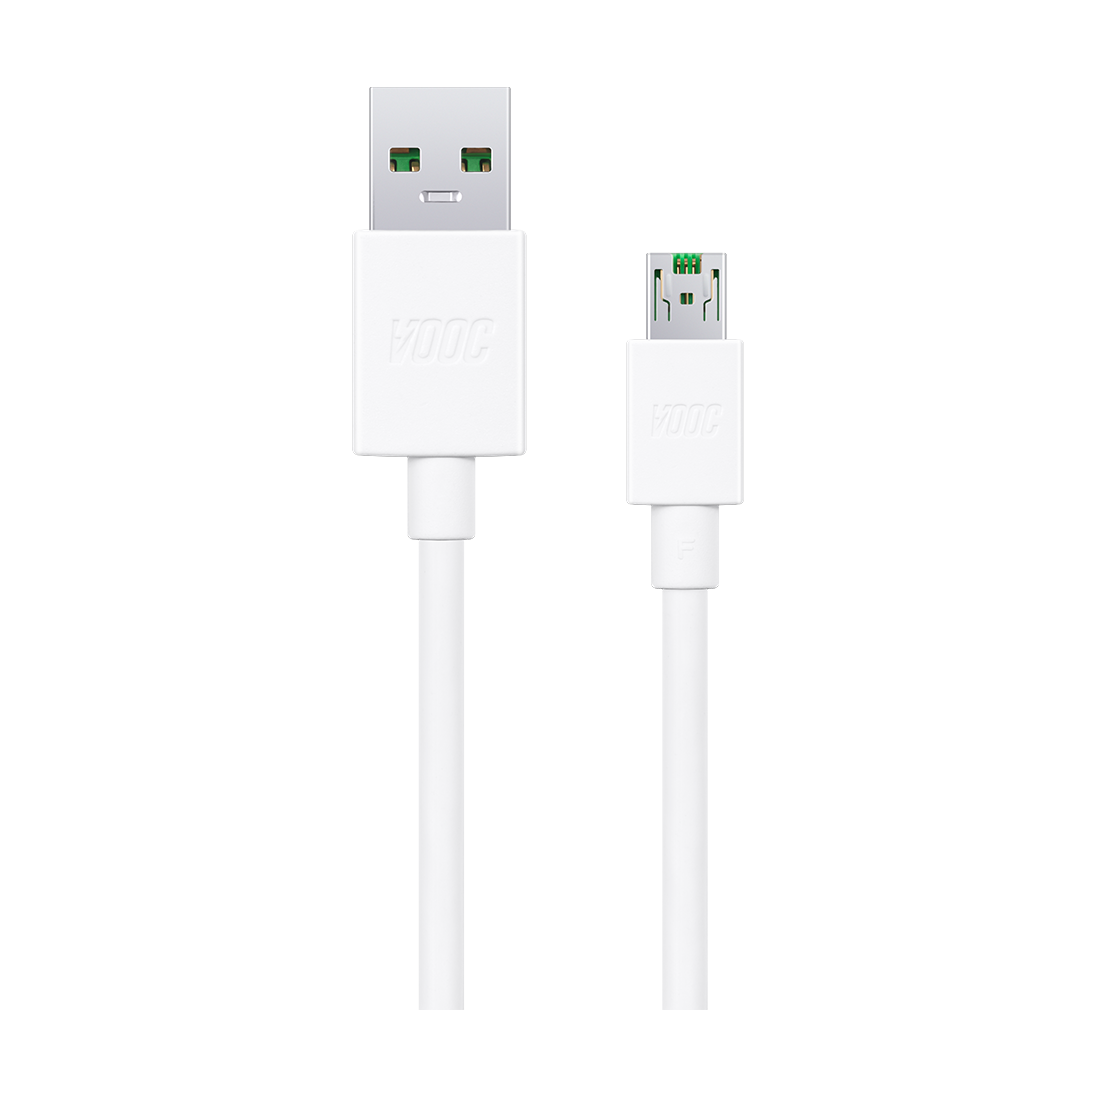 [OEM PACKAGE] OPPO VOOC Micro USB Cable